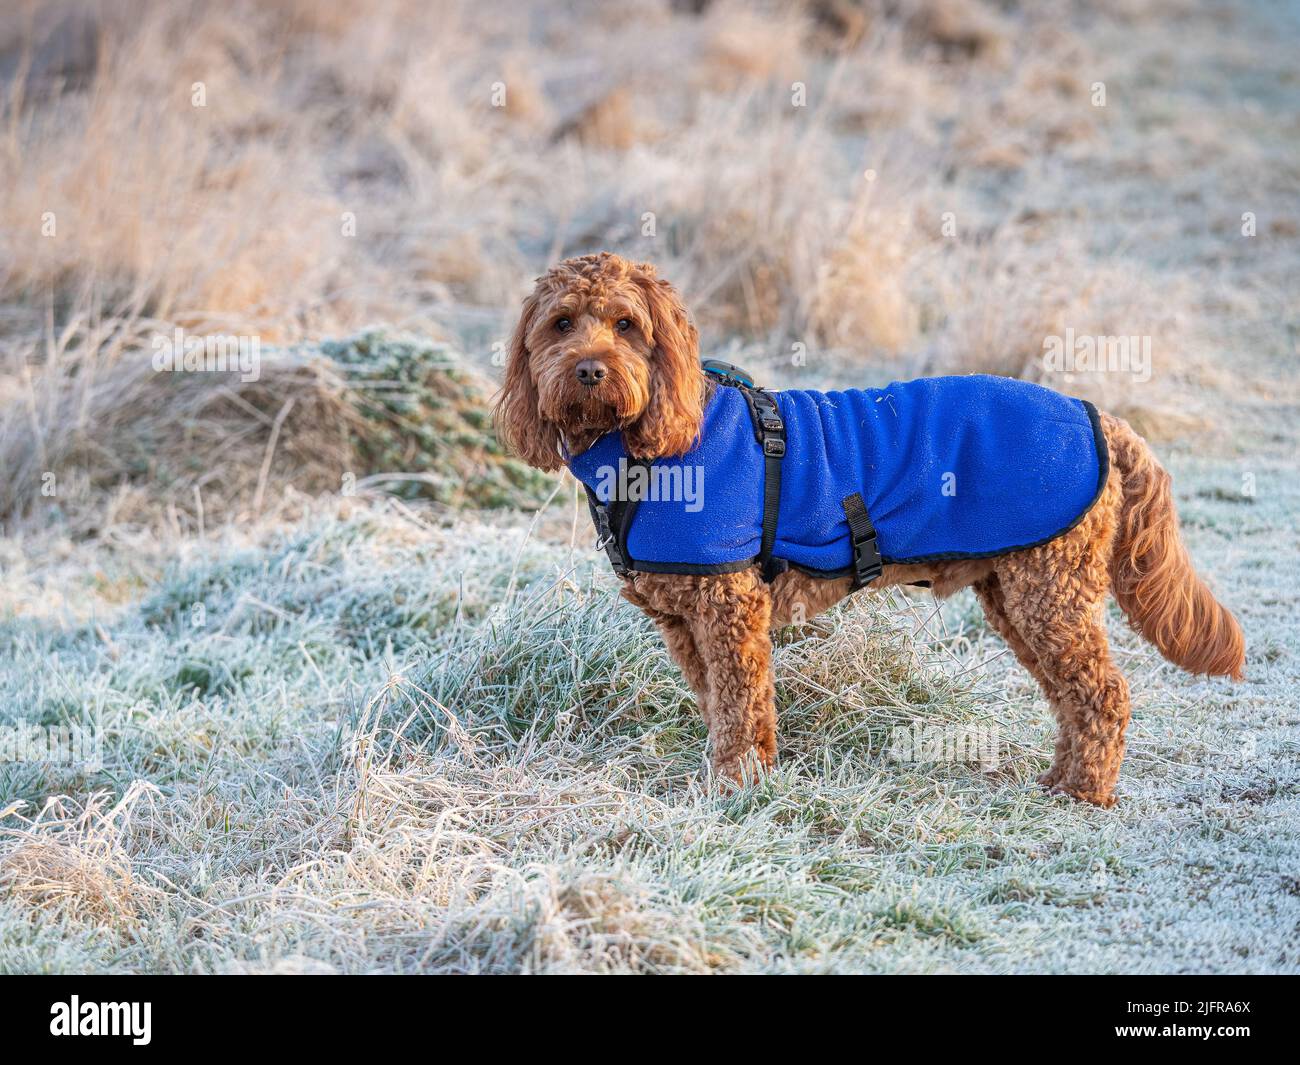 A red cockapoo dog standing attentively during an outdoor portrait session in a frosty field Stock Photo